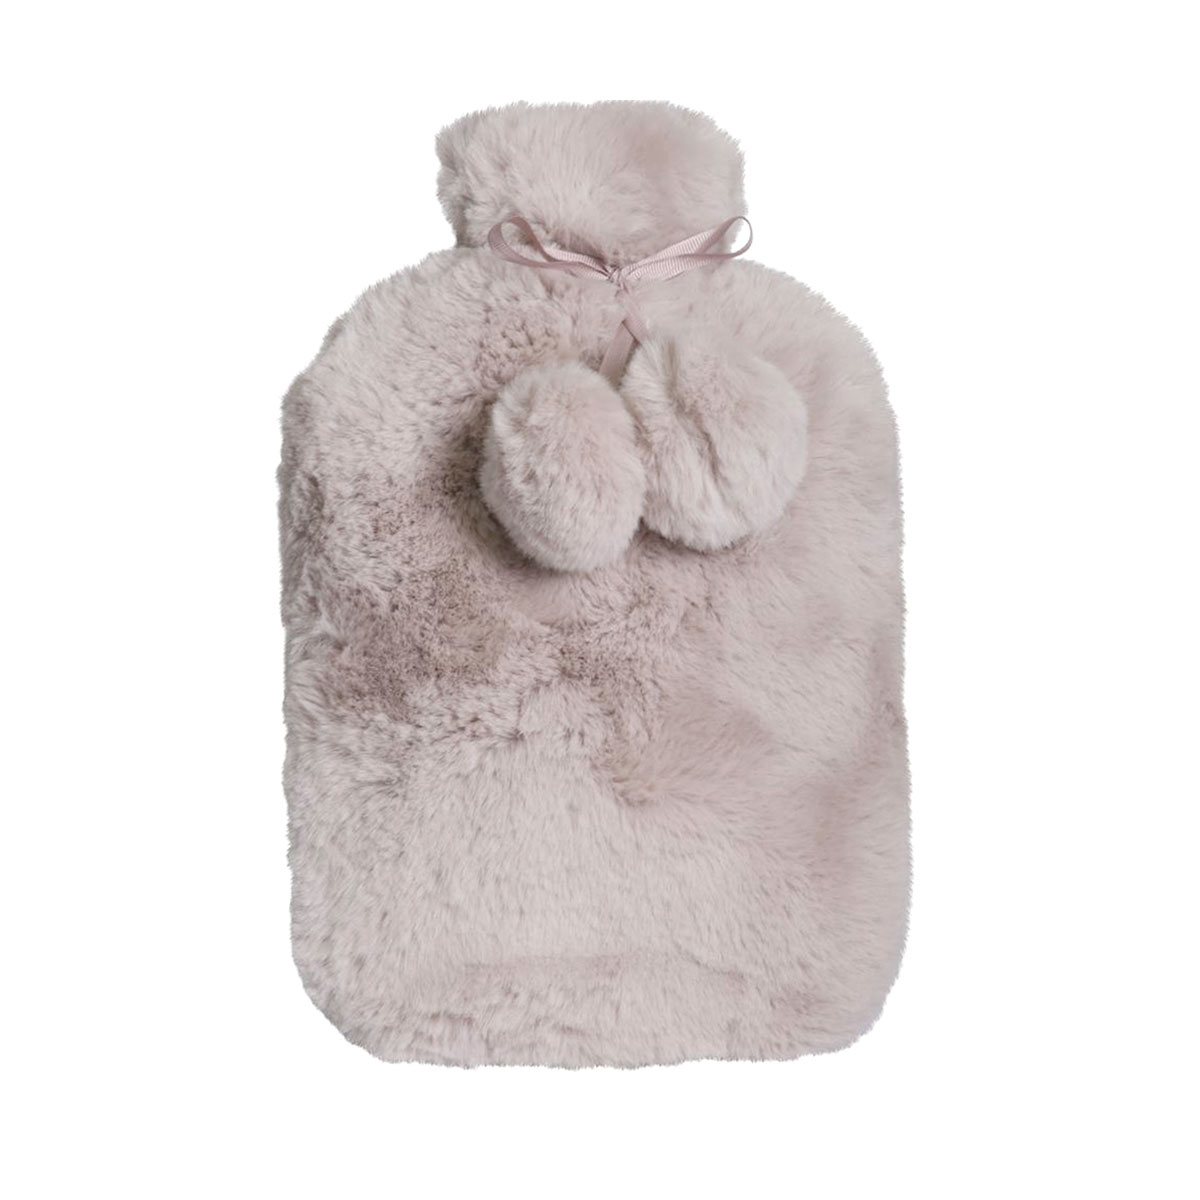 J.Elliot Home Amara Hot Water Bottle with Super Plush Faux Fur Cover  Price